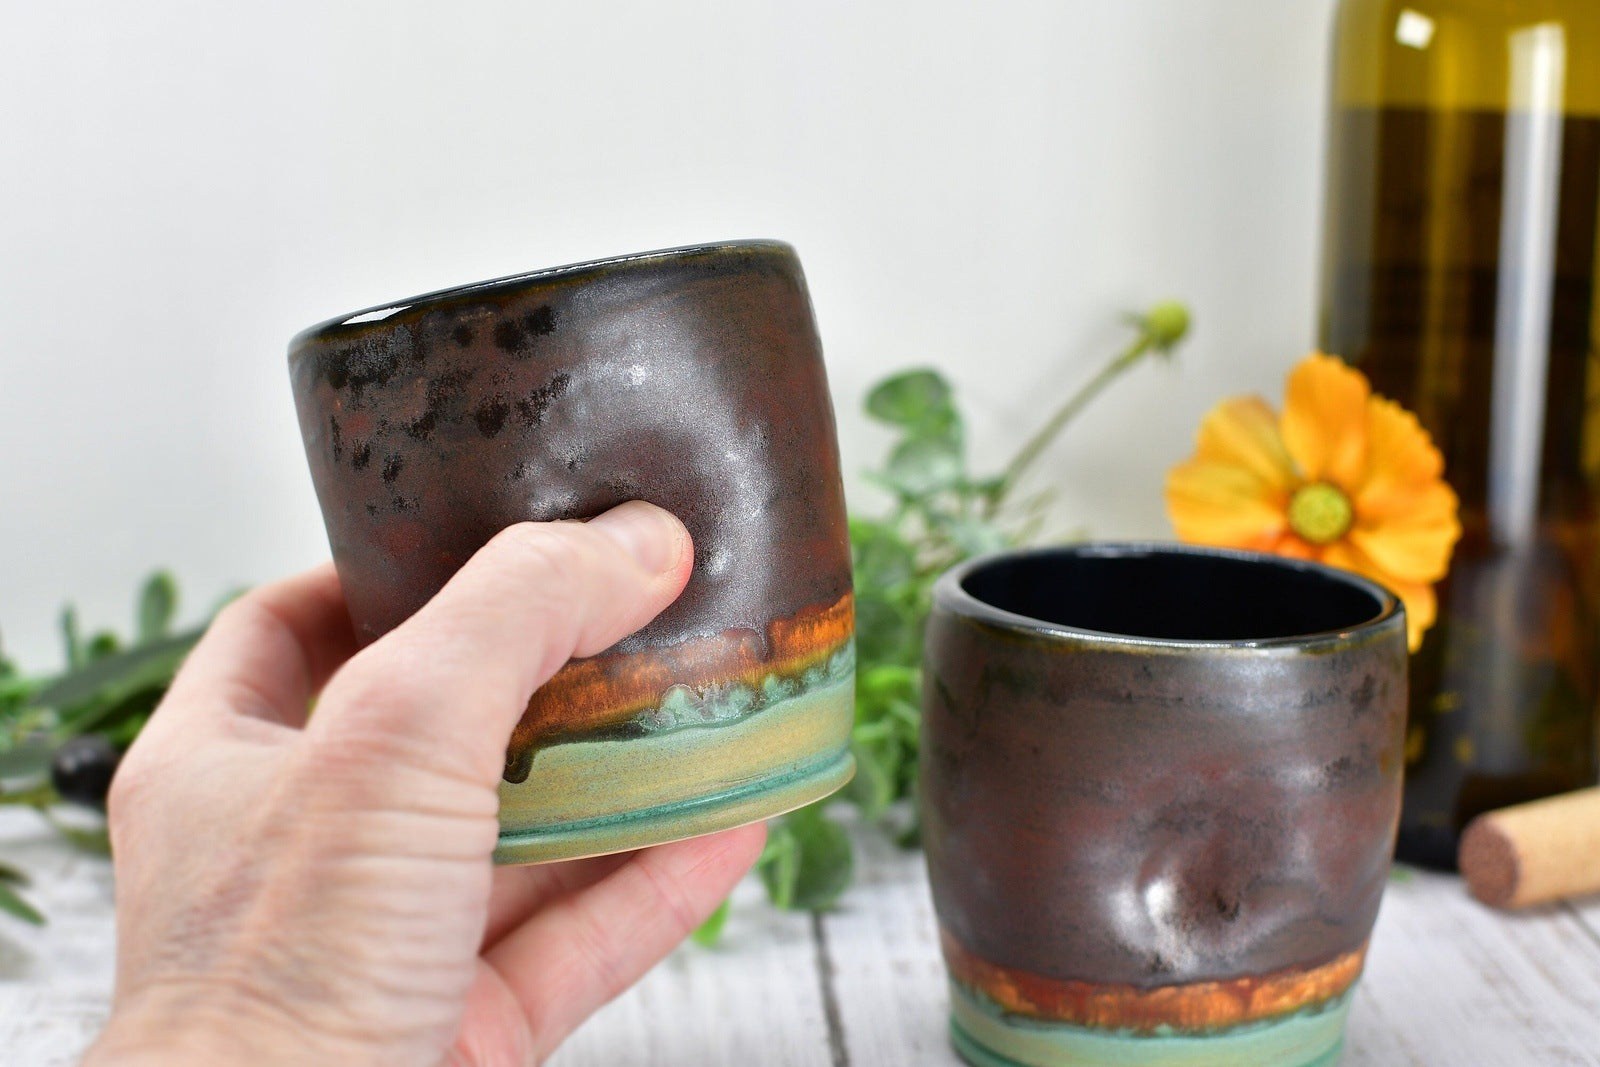 Stemless Ceramic Wine Tumbler Handmade with Thumb Dent, Desert Southwest Stoneware Pottery Sake Cup in Turquoise, Copper, and Sage Green